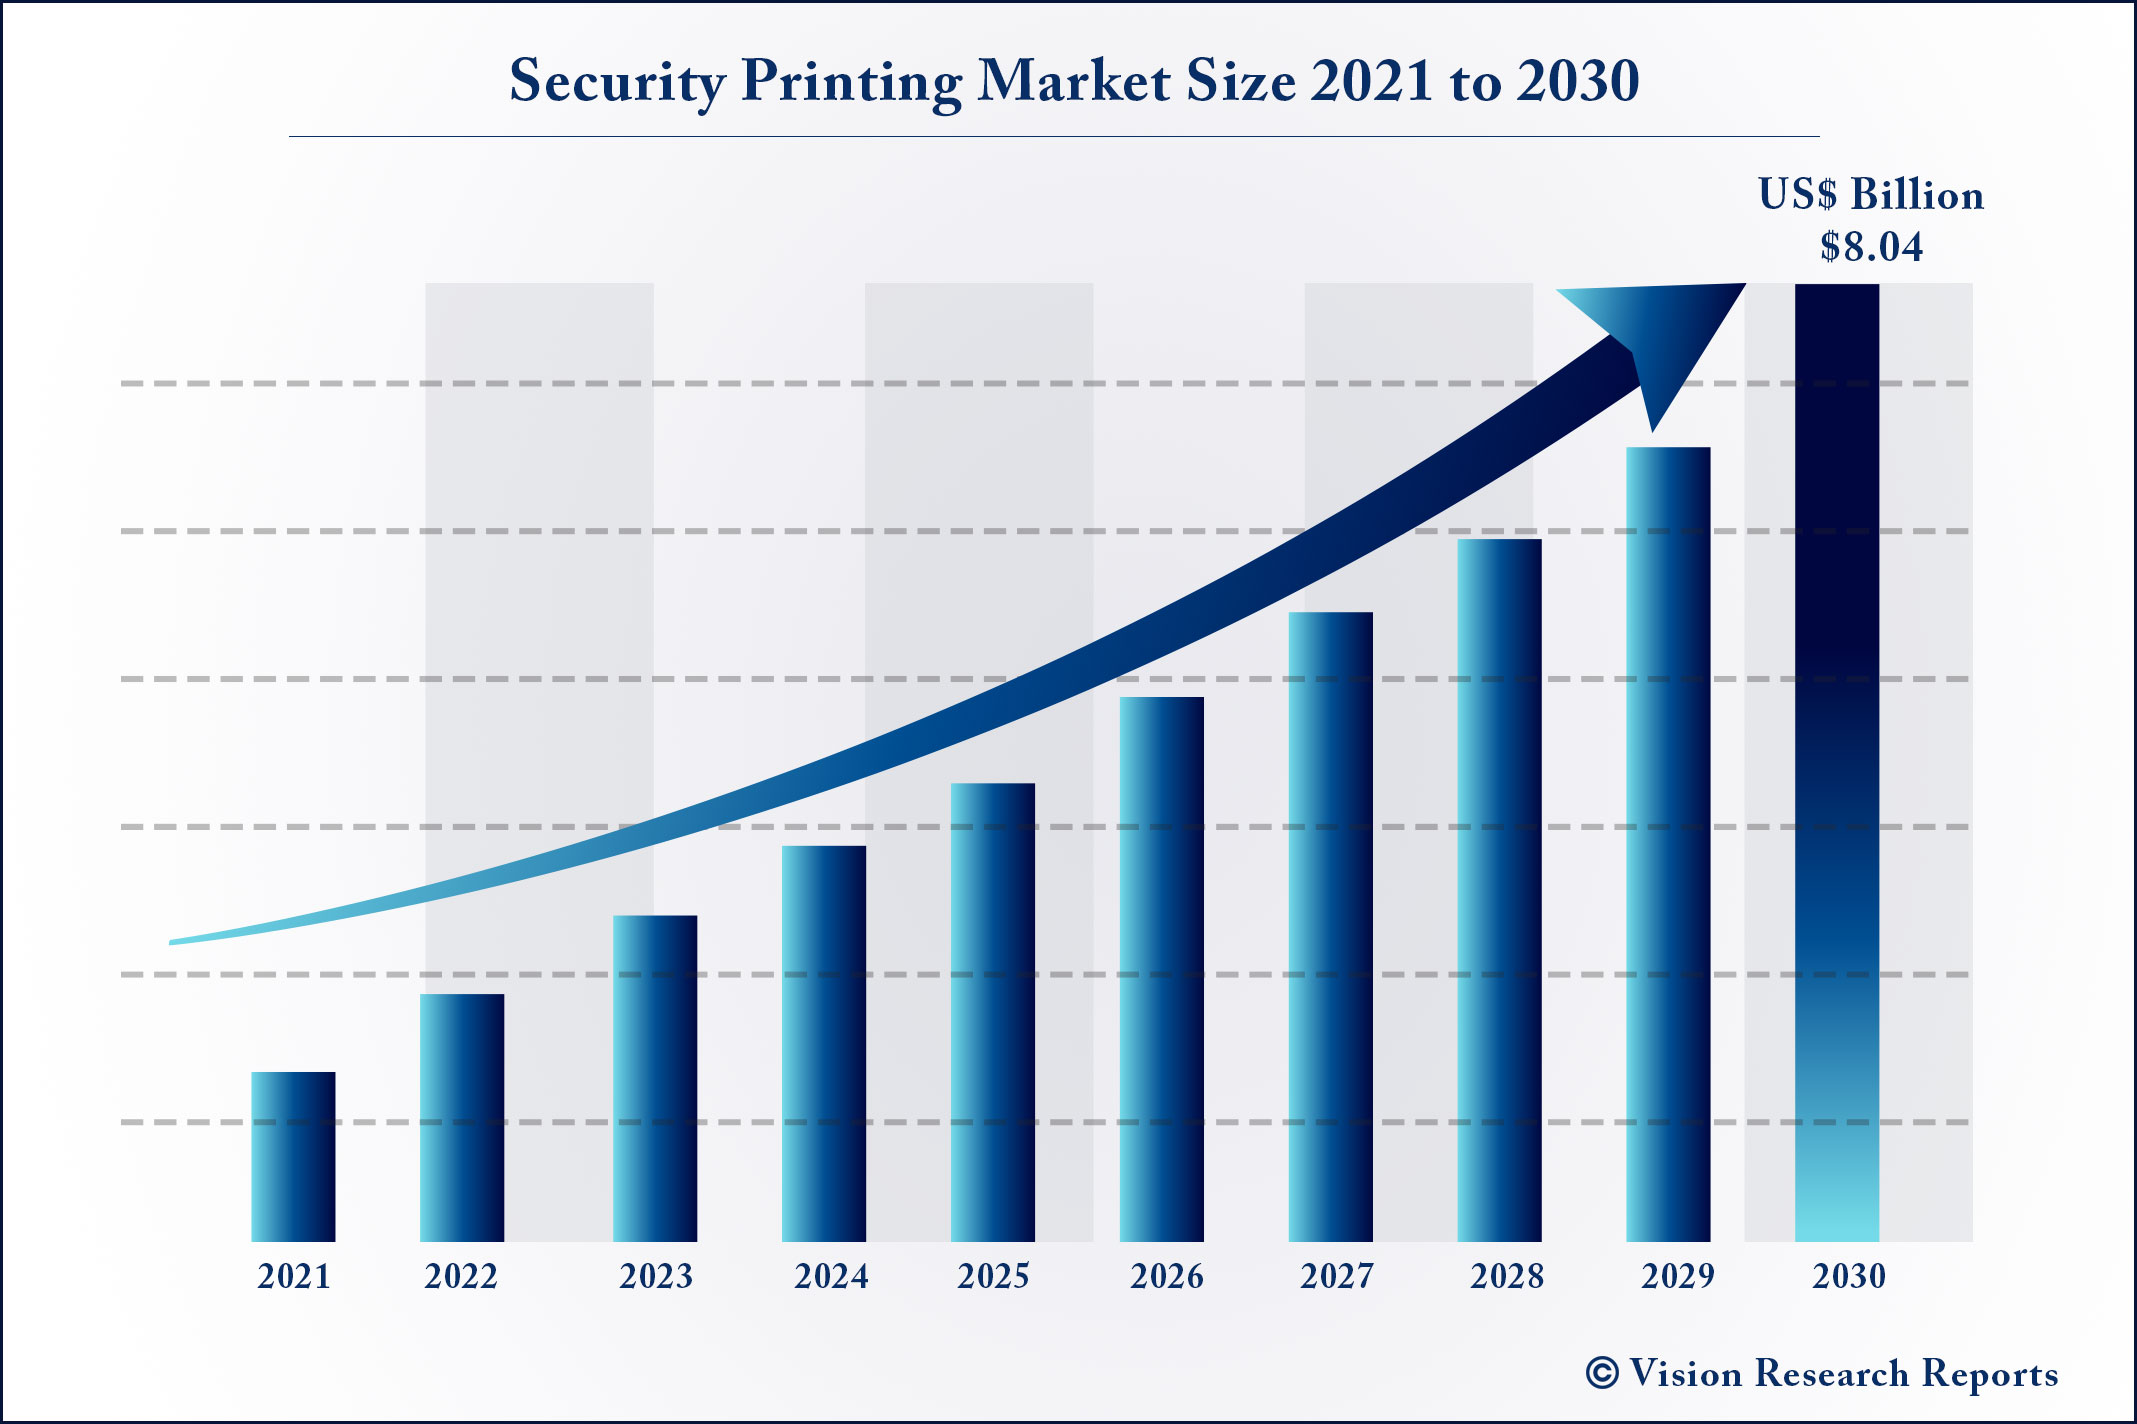 Security Printing Market Size 2021 to 2030